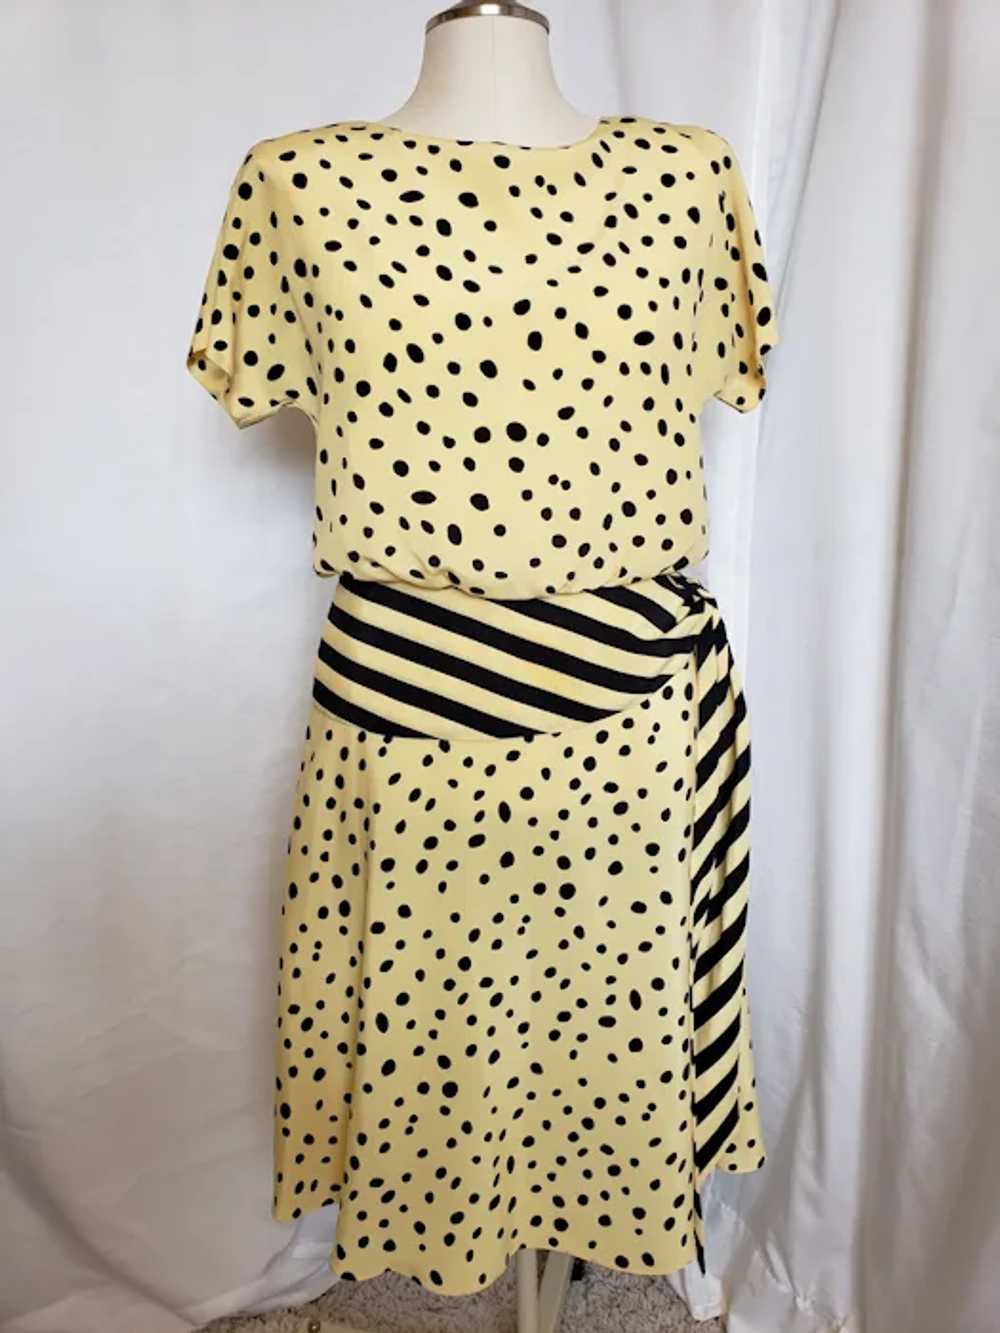 Sunny Yellow and Black Dots 'n Stripes Dress - image 2